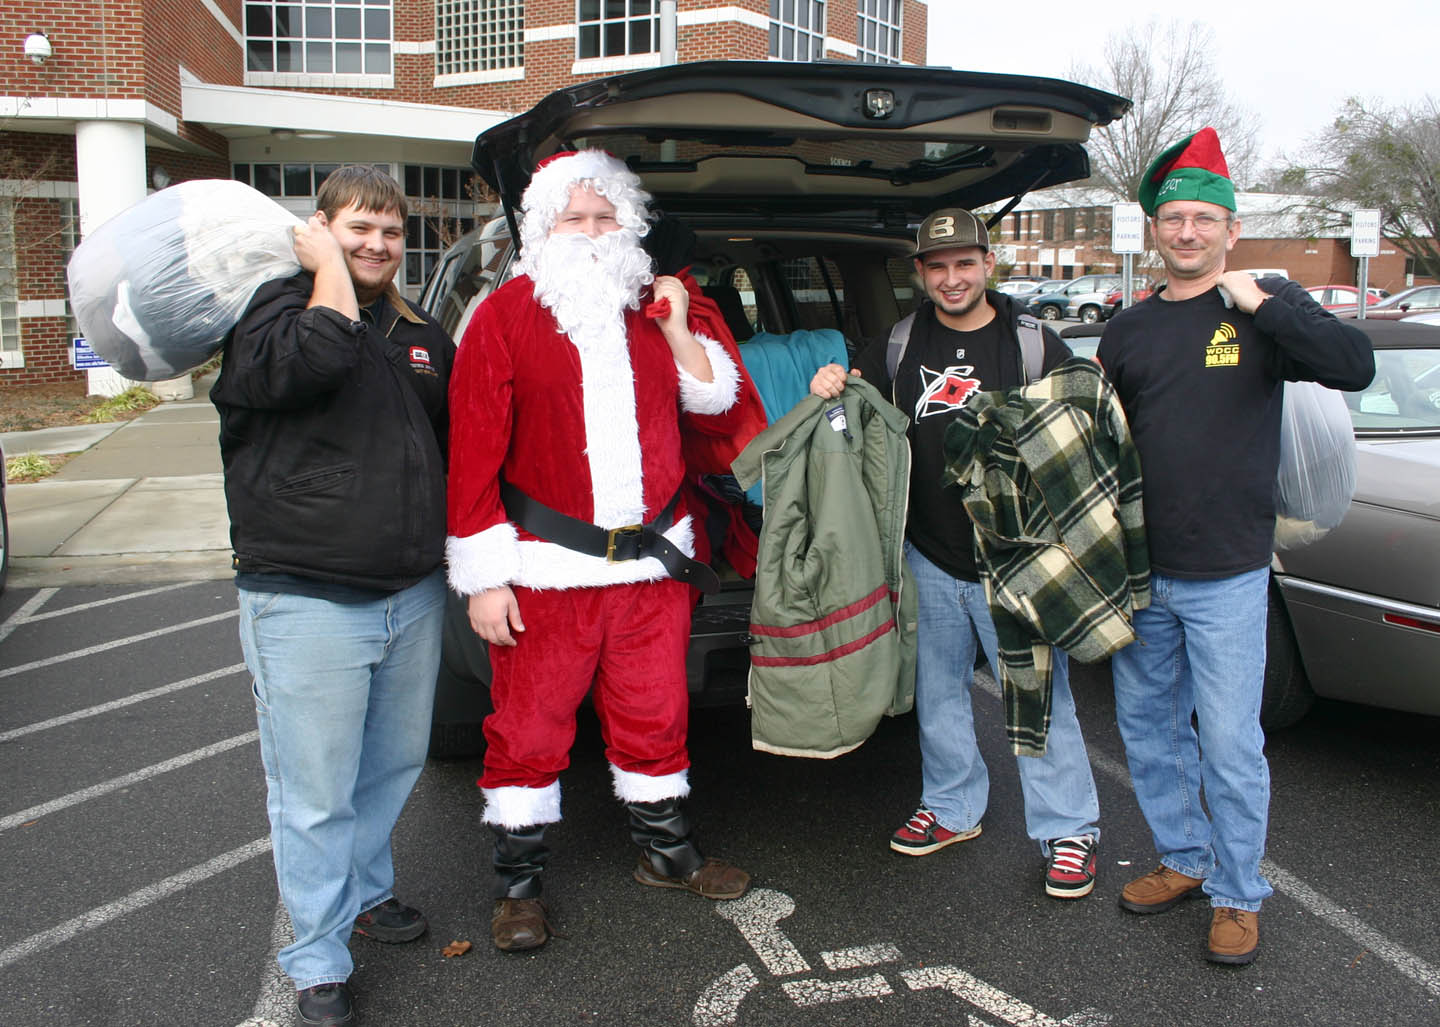 Read the full story, Central Carolina C.C. Broadcasting students collect, donate coats